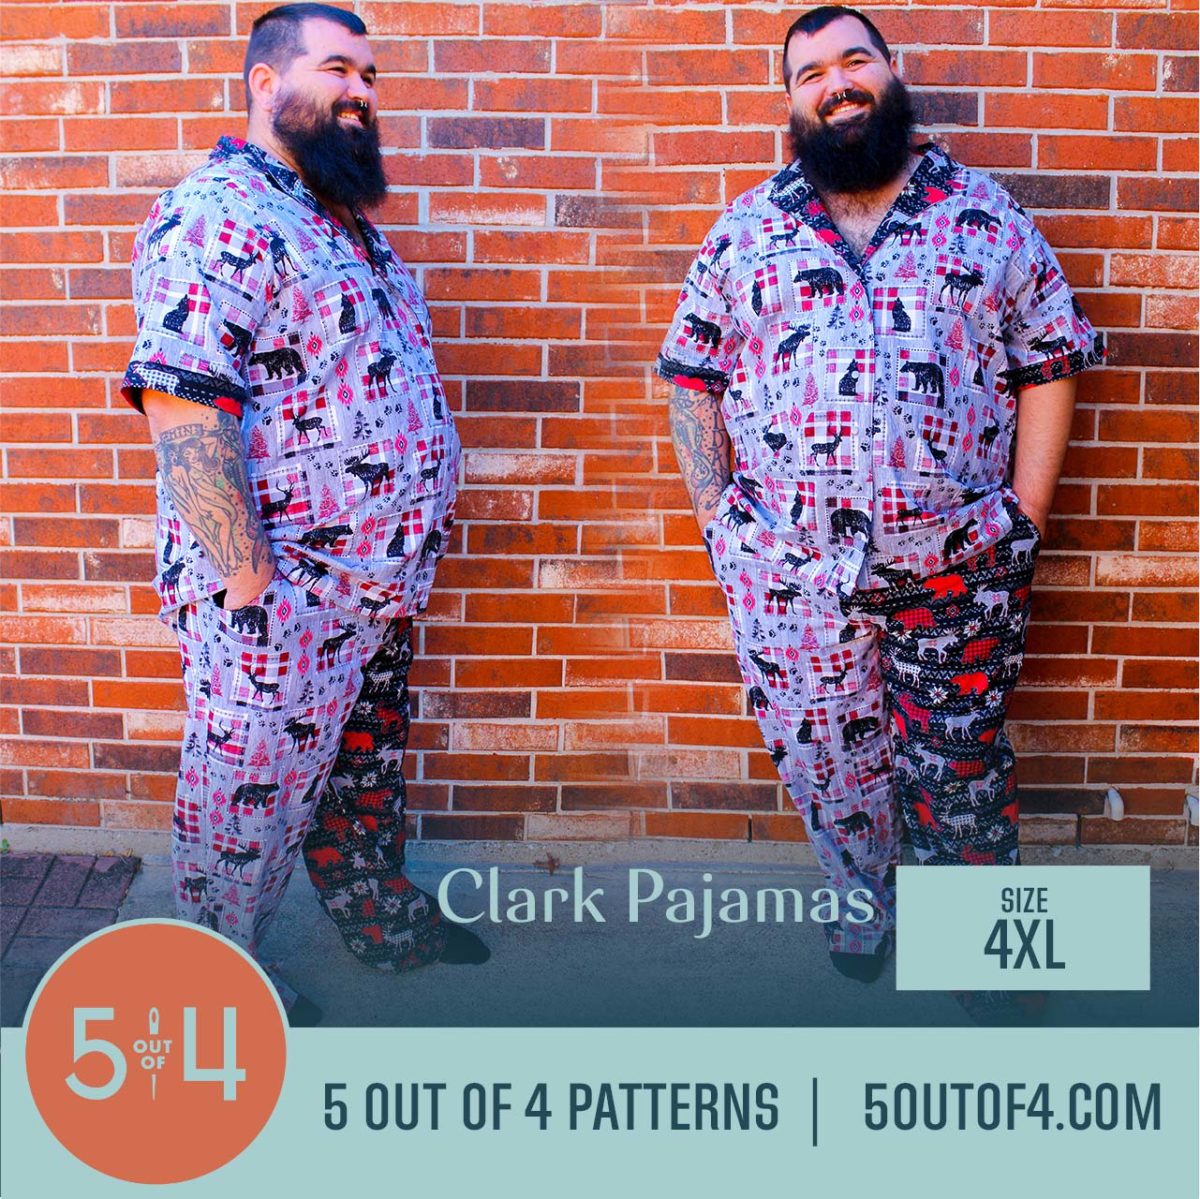 5oo4 Woven Pajama Pattern for Men size 4XL